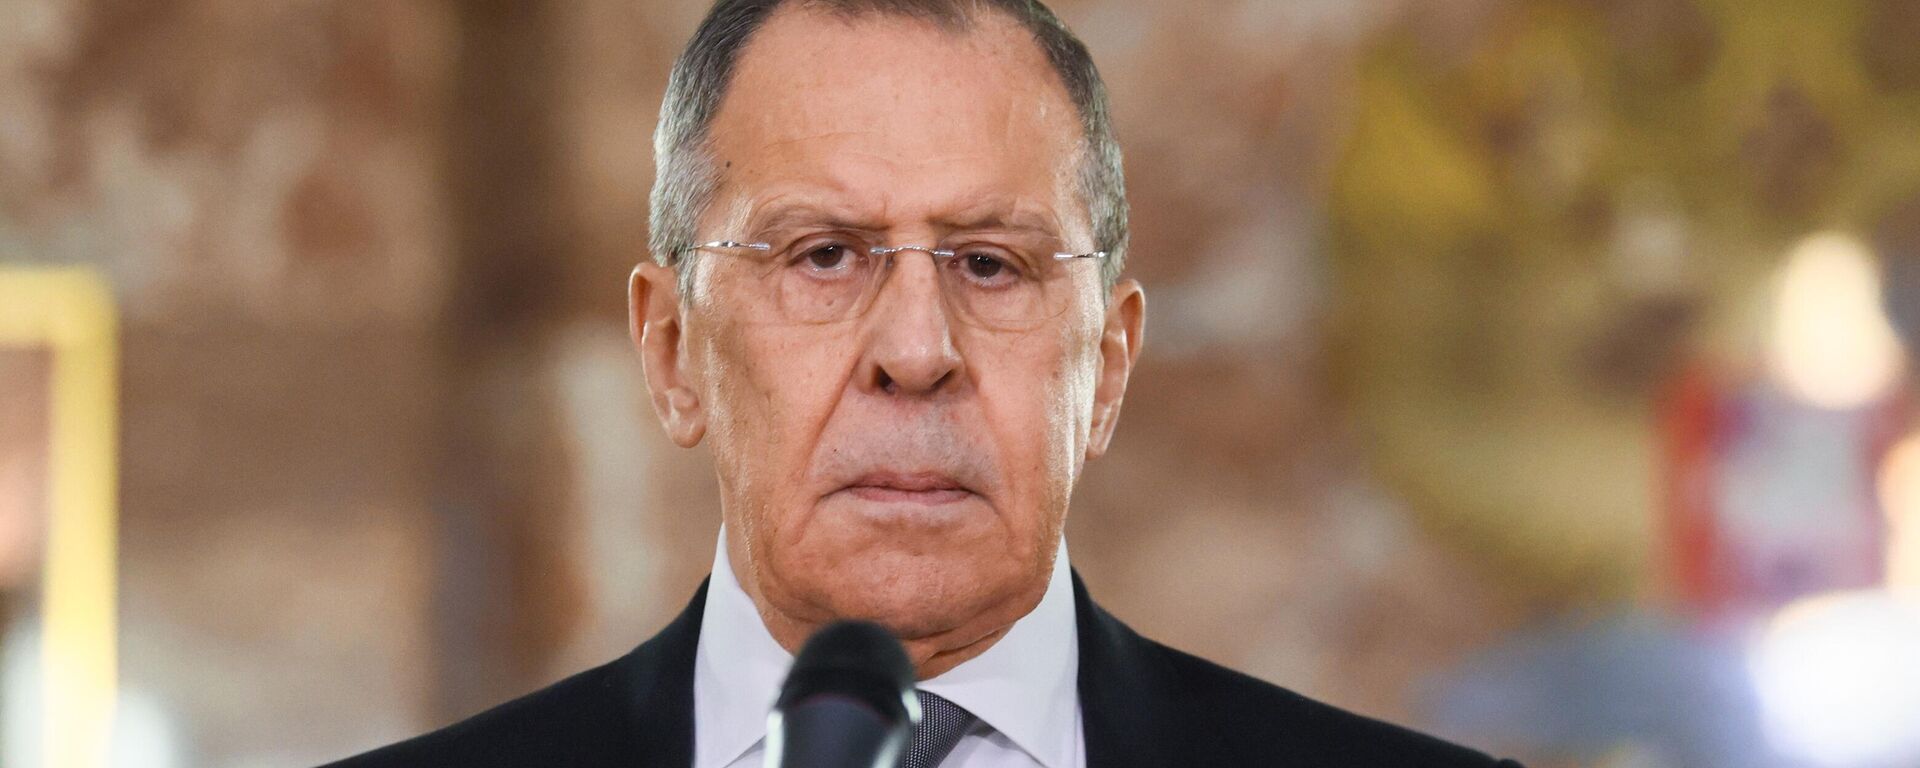 Russian Foreign Minister Sergei Lavrov at a Foreign Ministry ceremony in Moscow on February 10, 2023. - Sputnik International, 1920, 24.04.2023